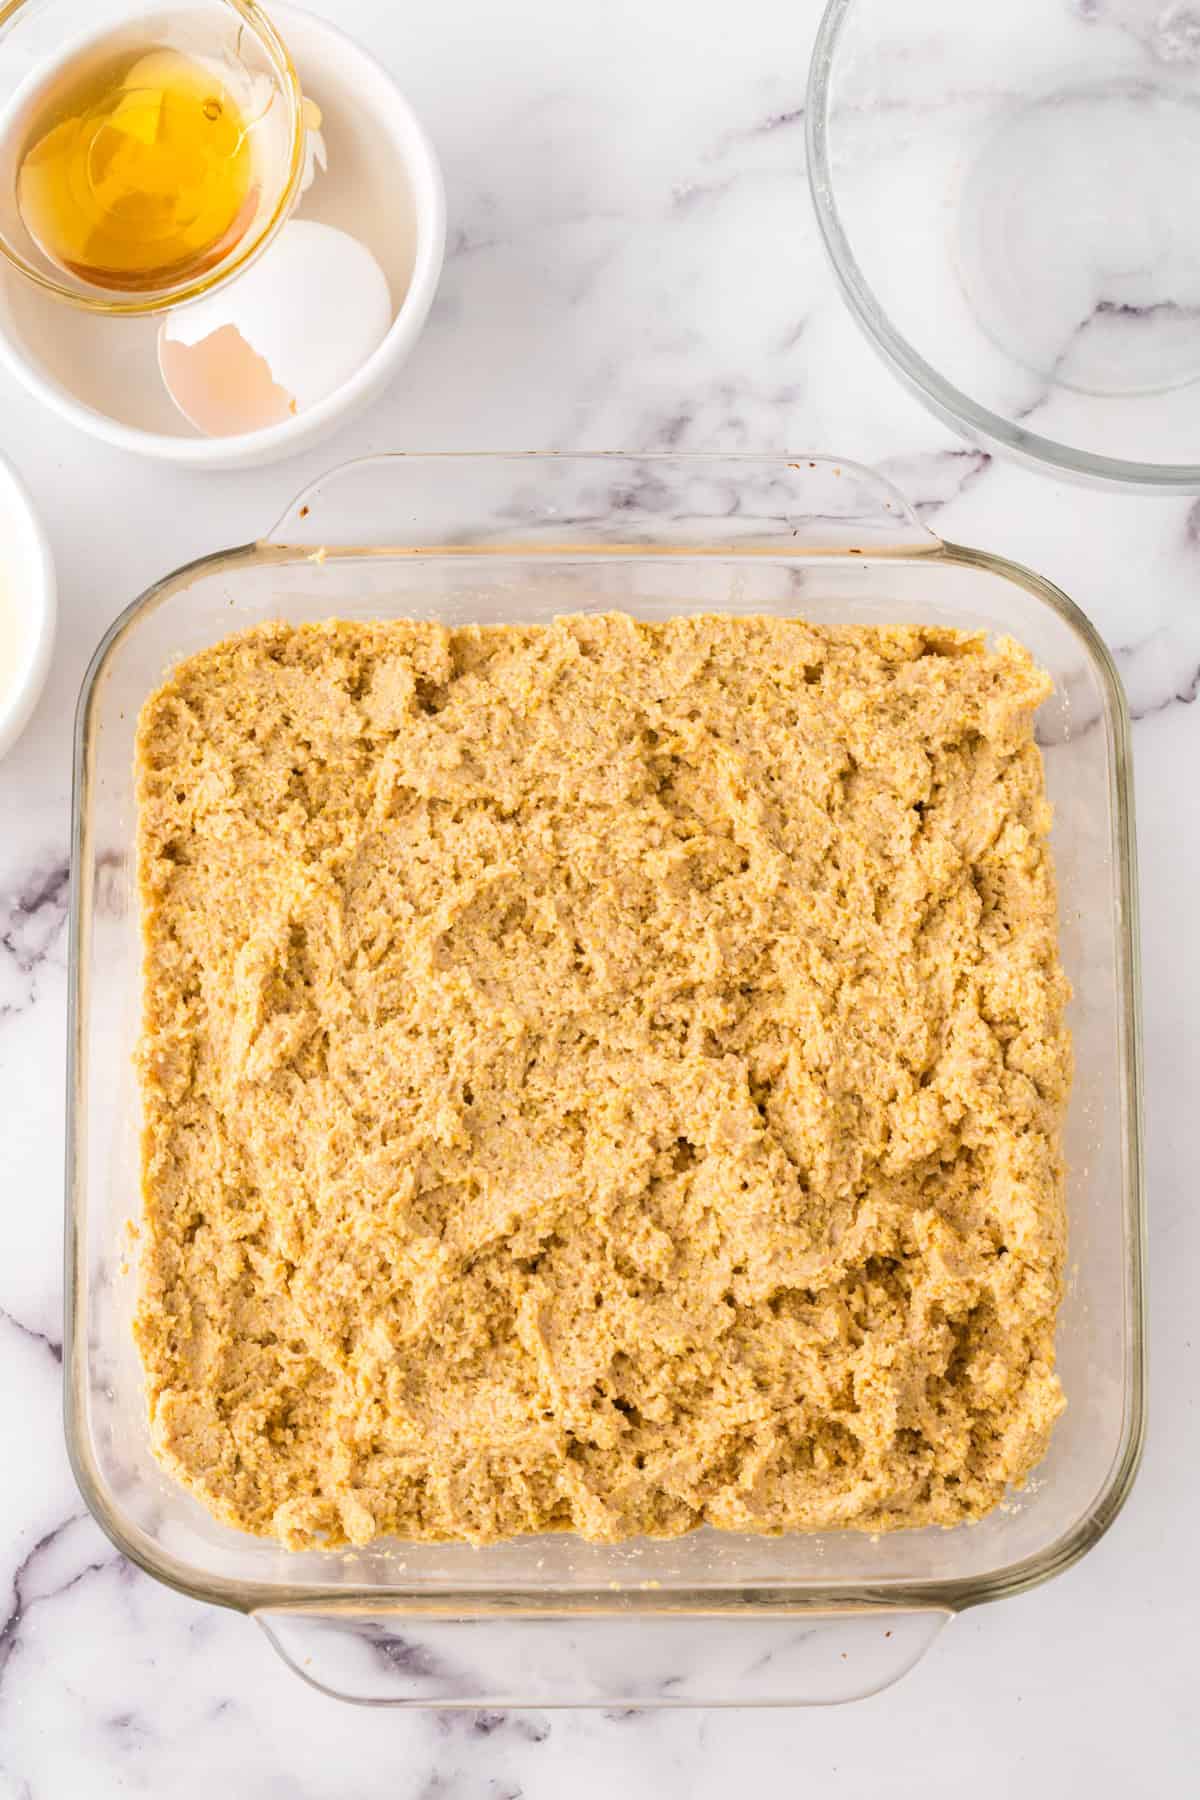 clear baking dish with whole wheat cornbread batter inside ready to bake.